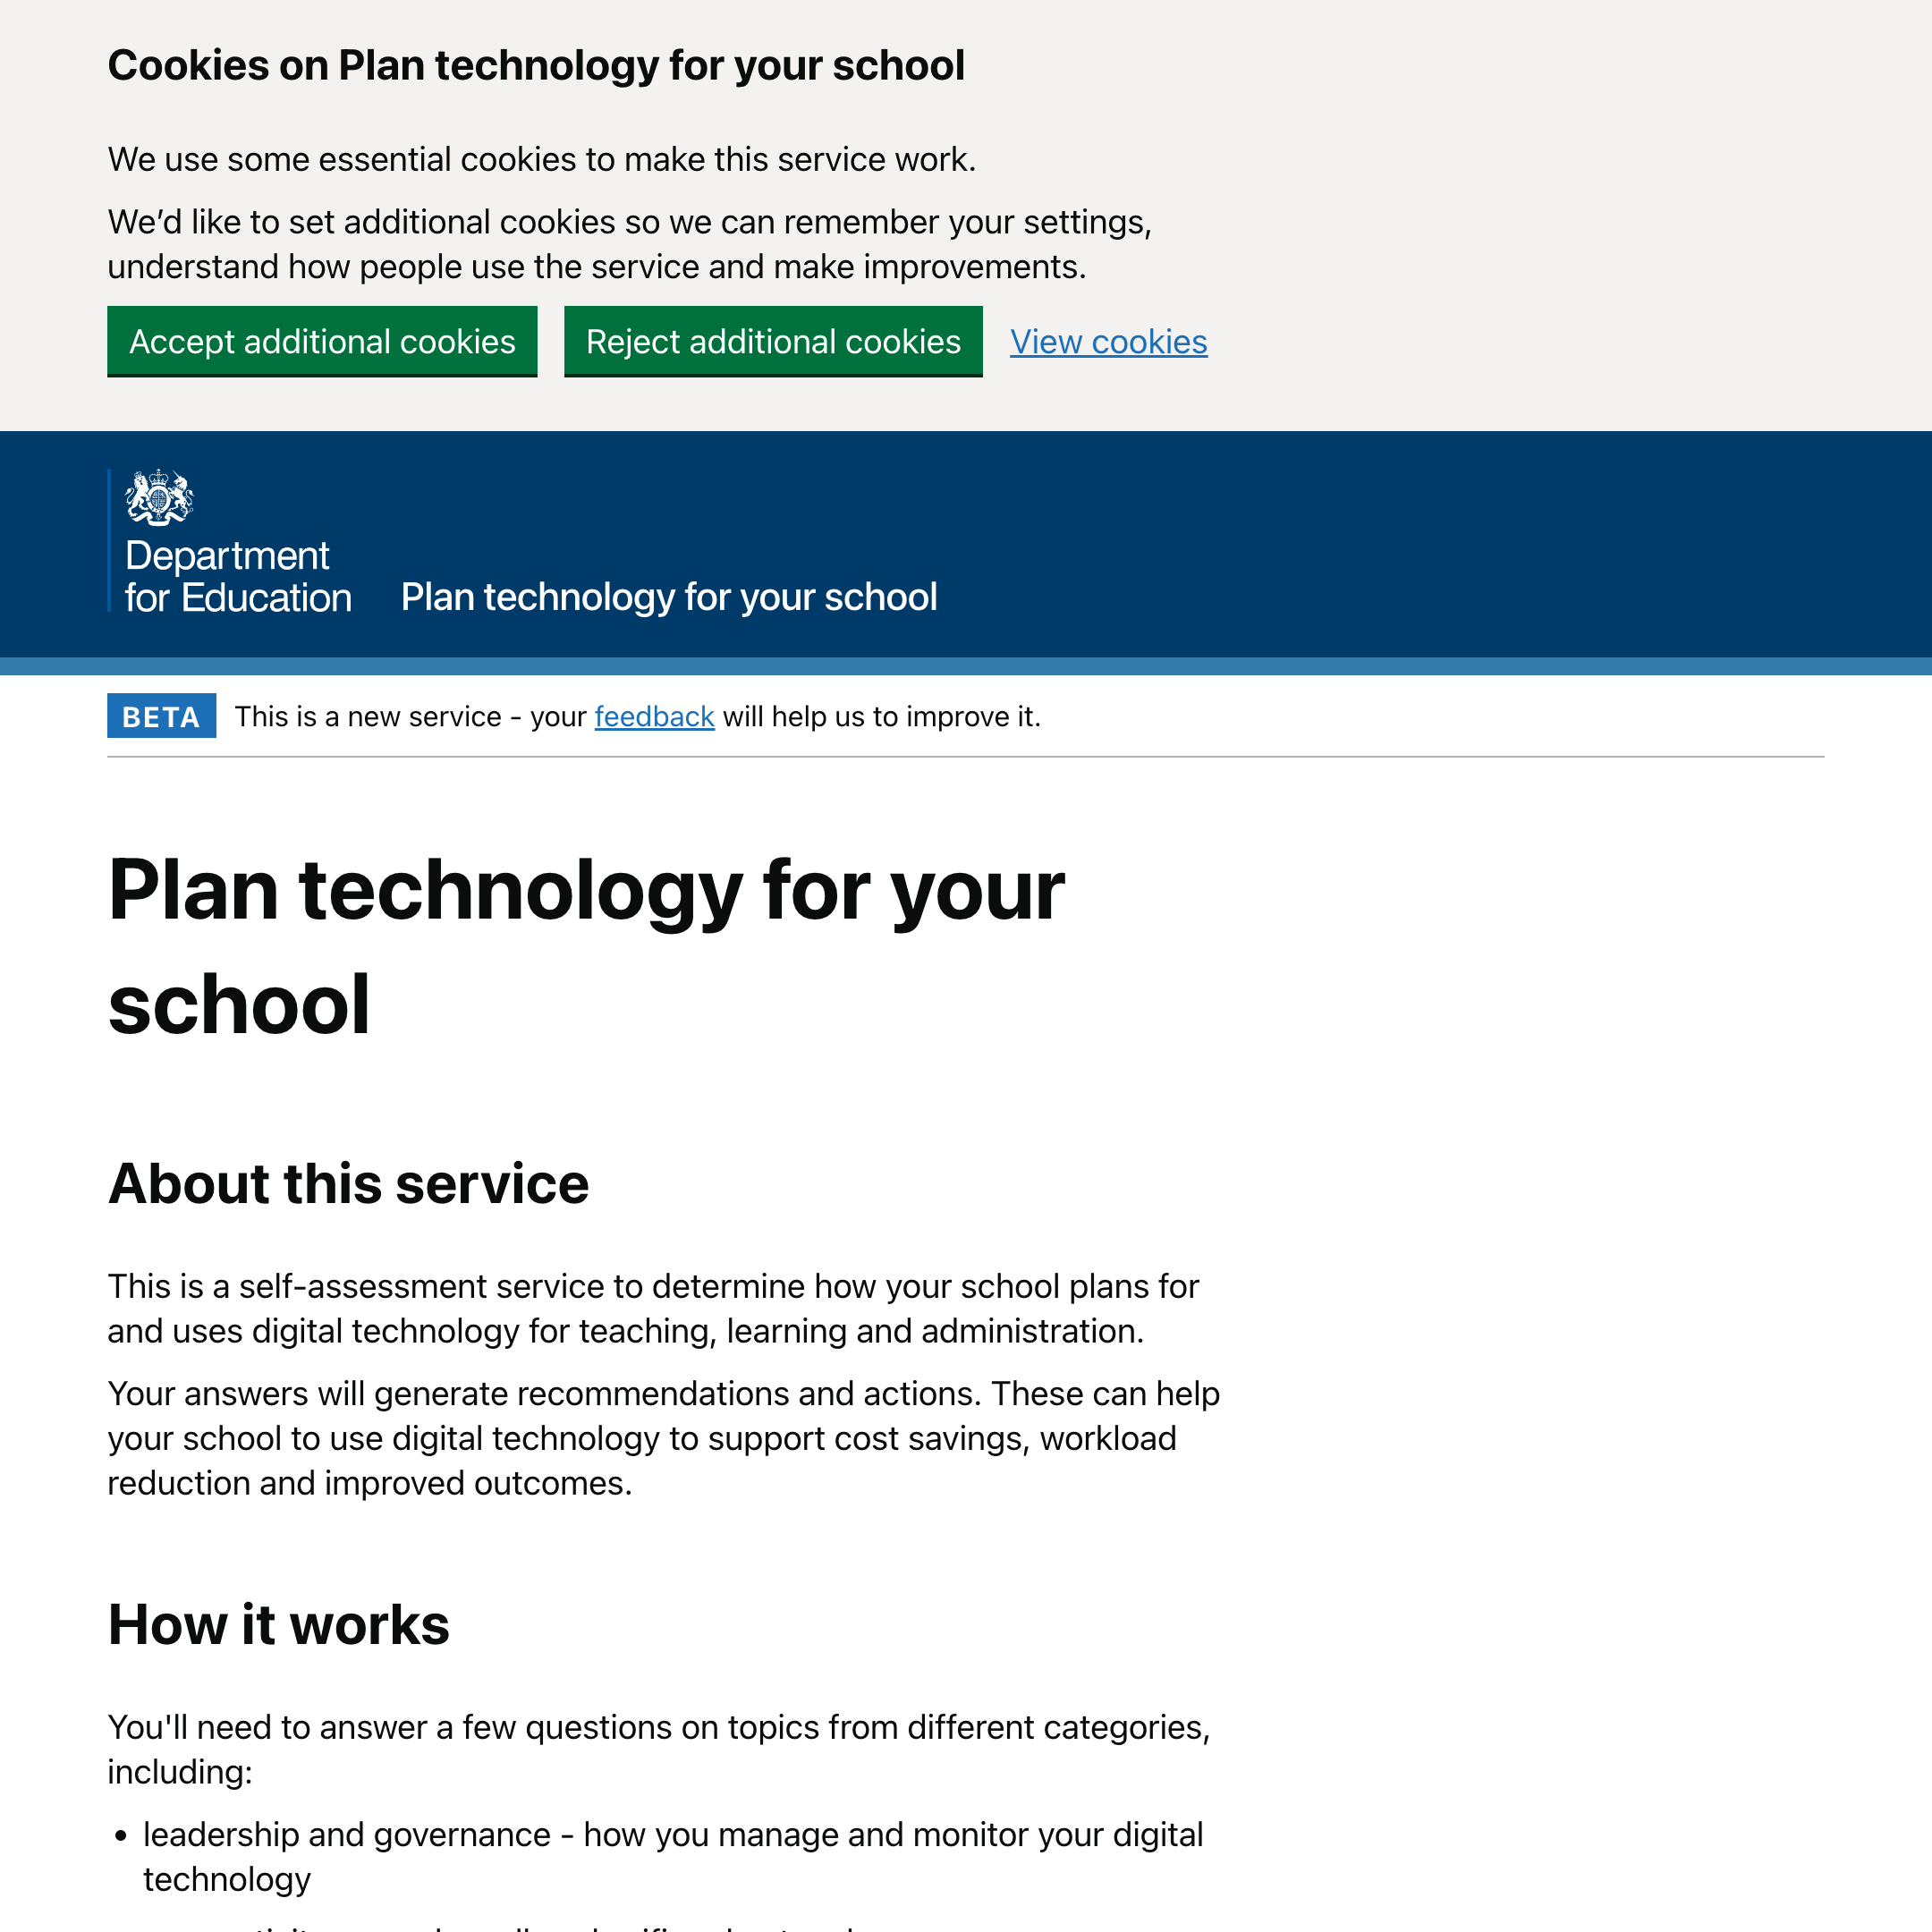 Plan technology for your school